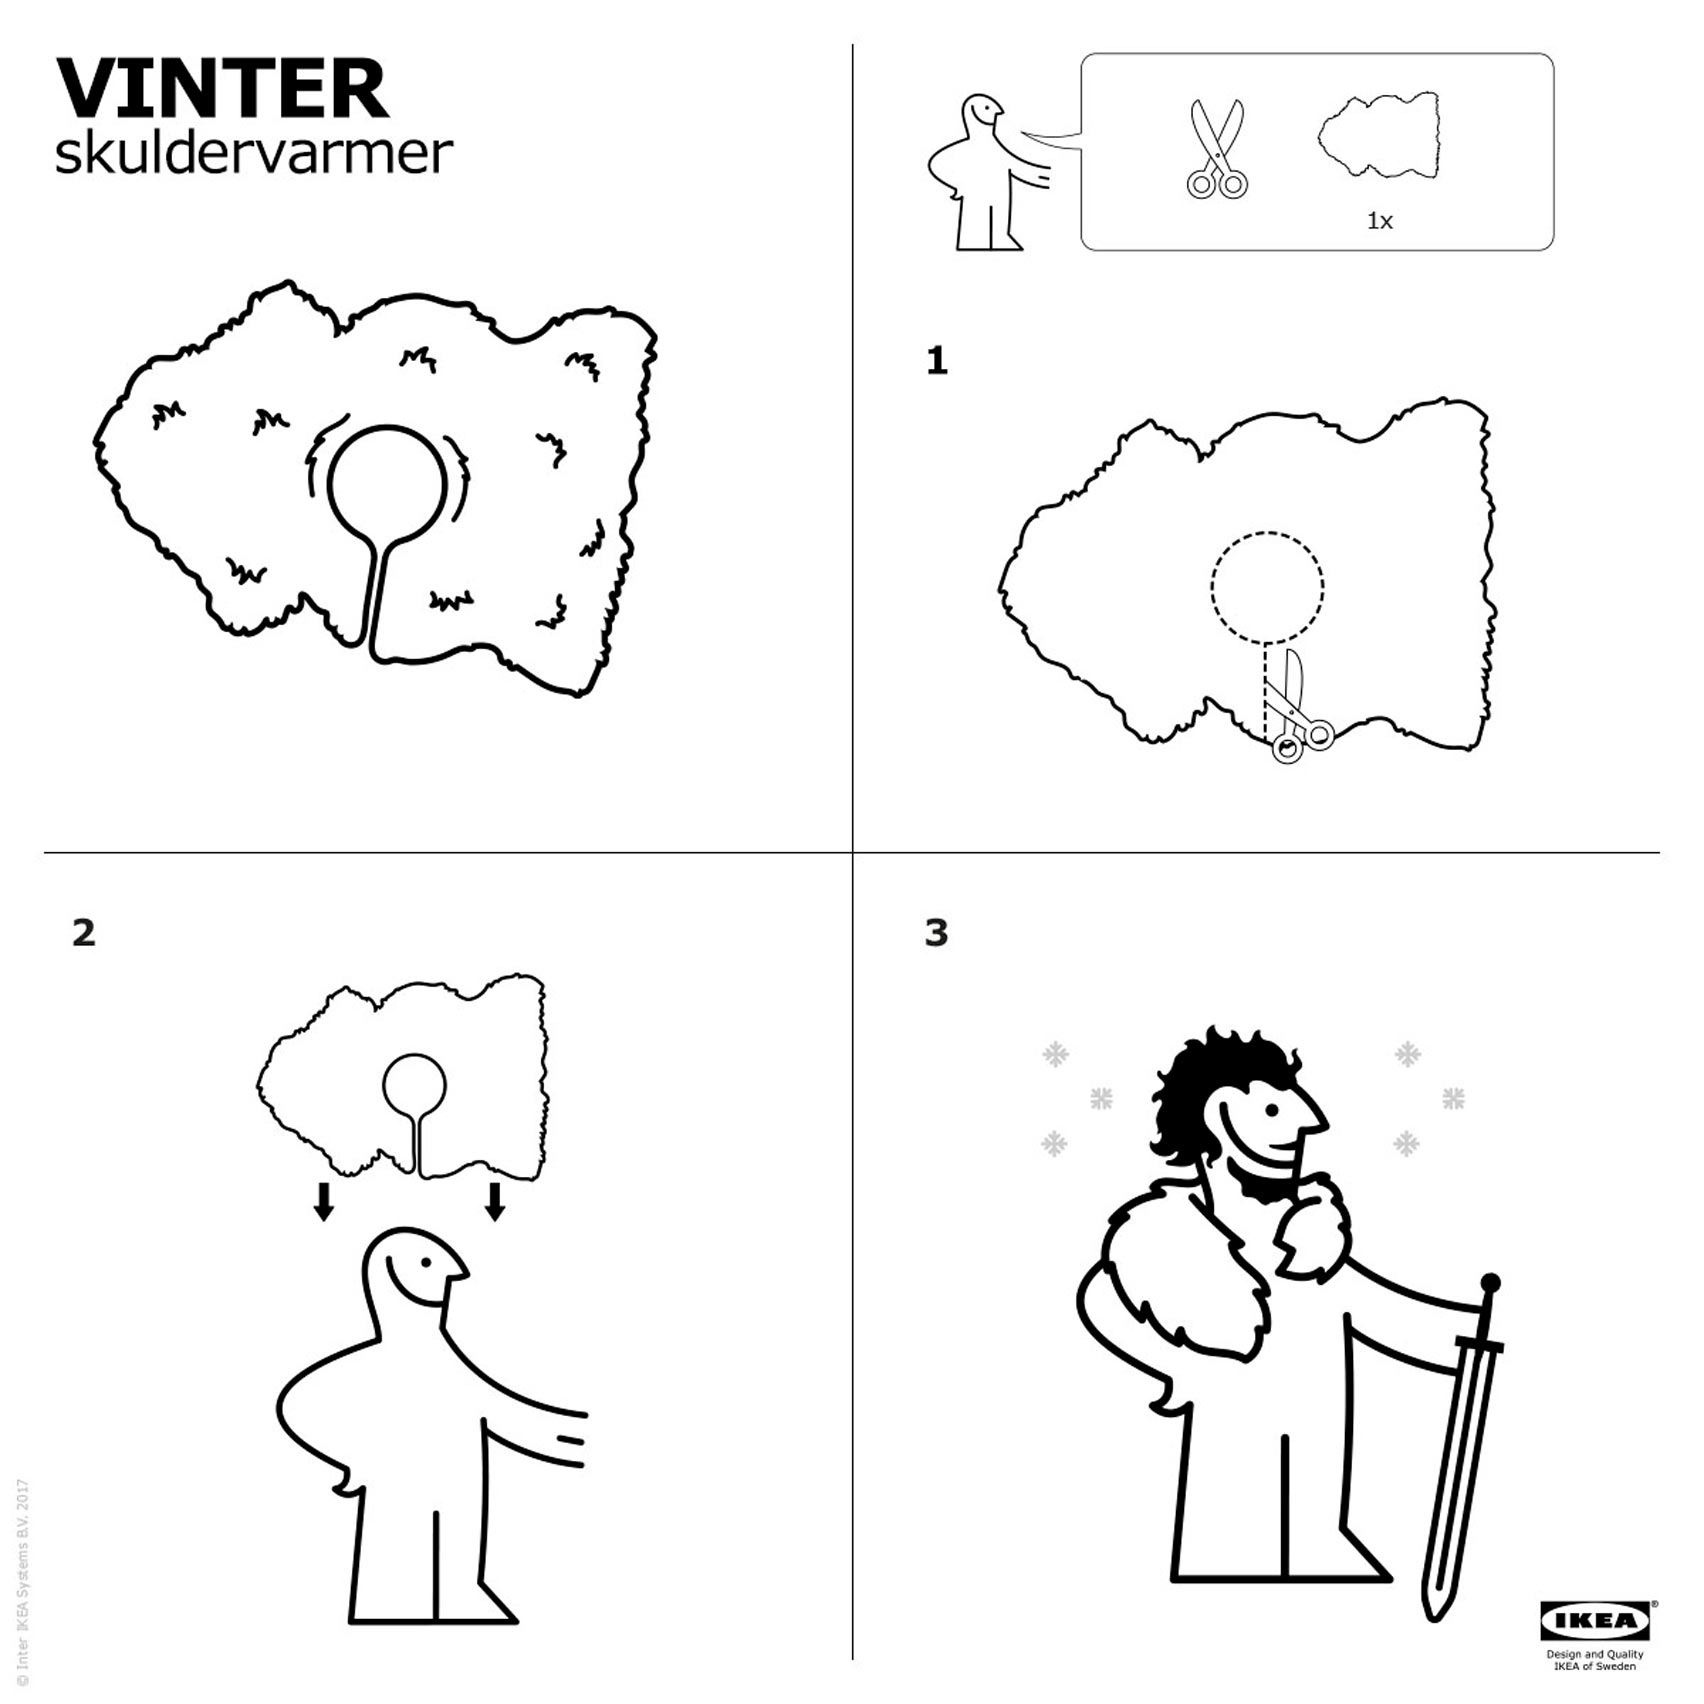 IKEA instruction manual shows how to make your own Game of Thrones cape